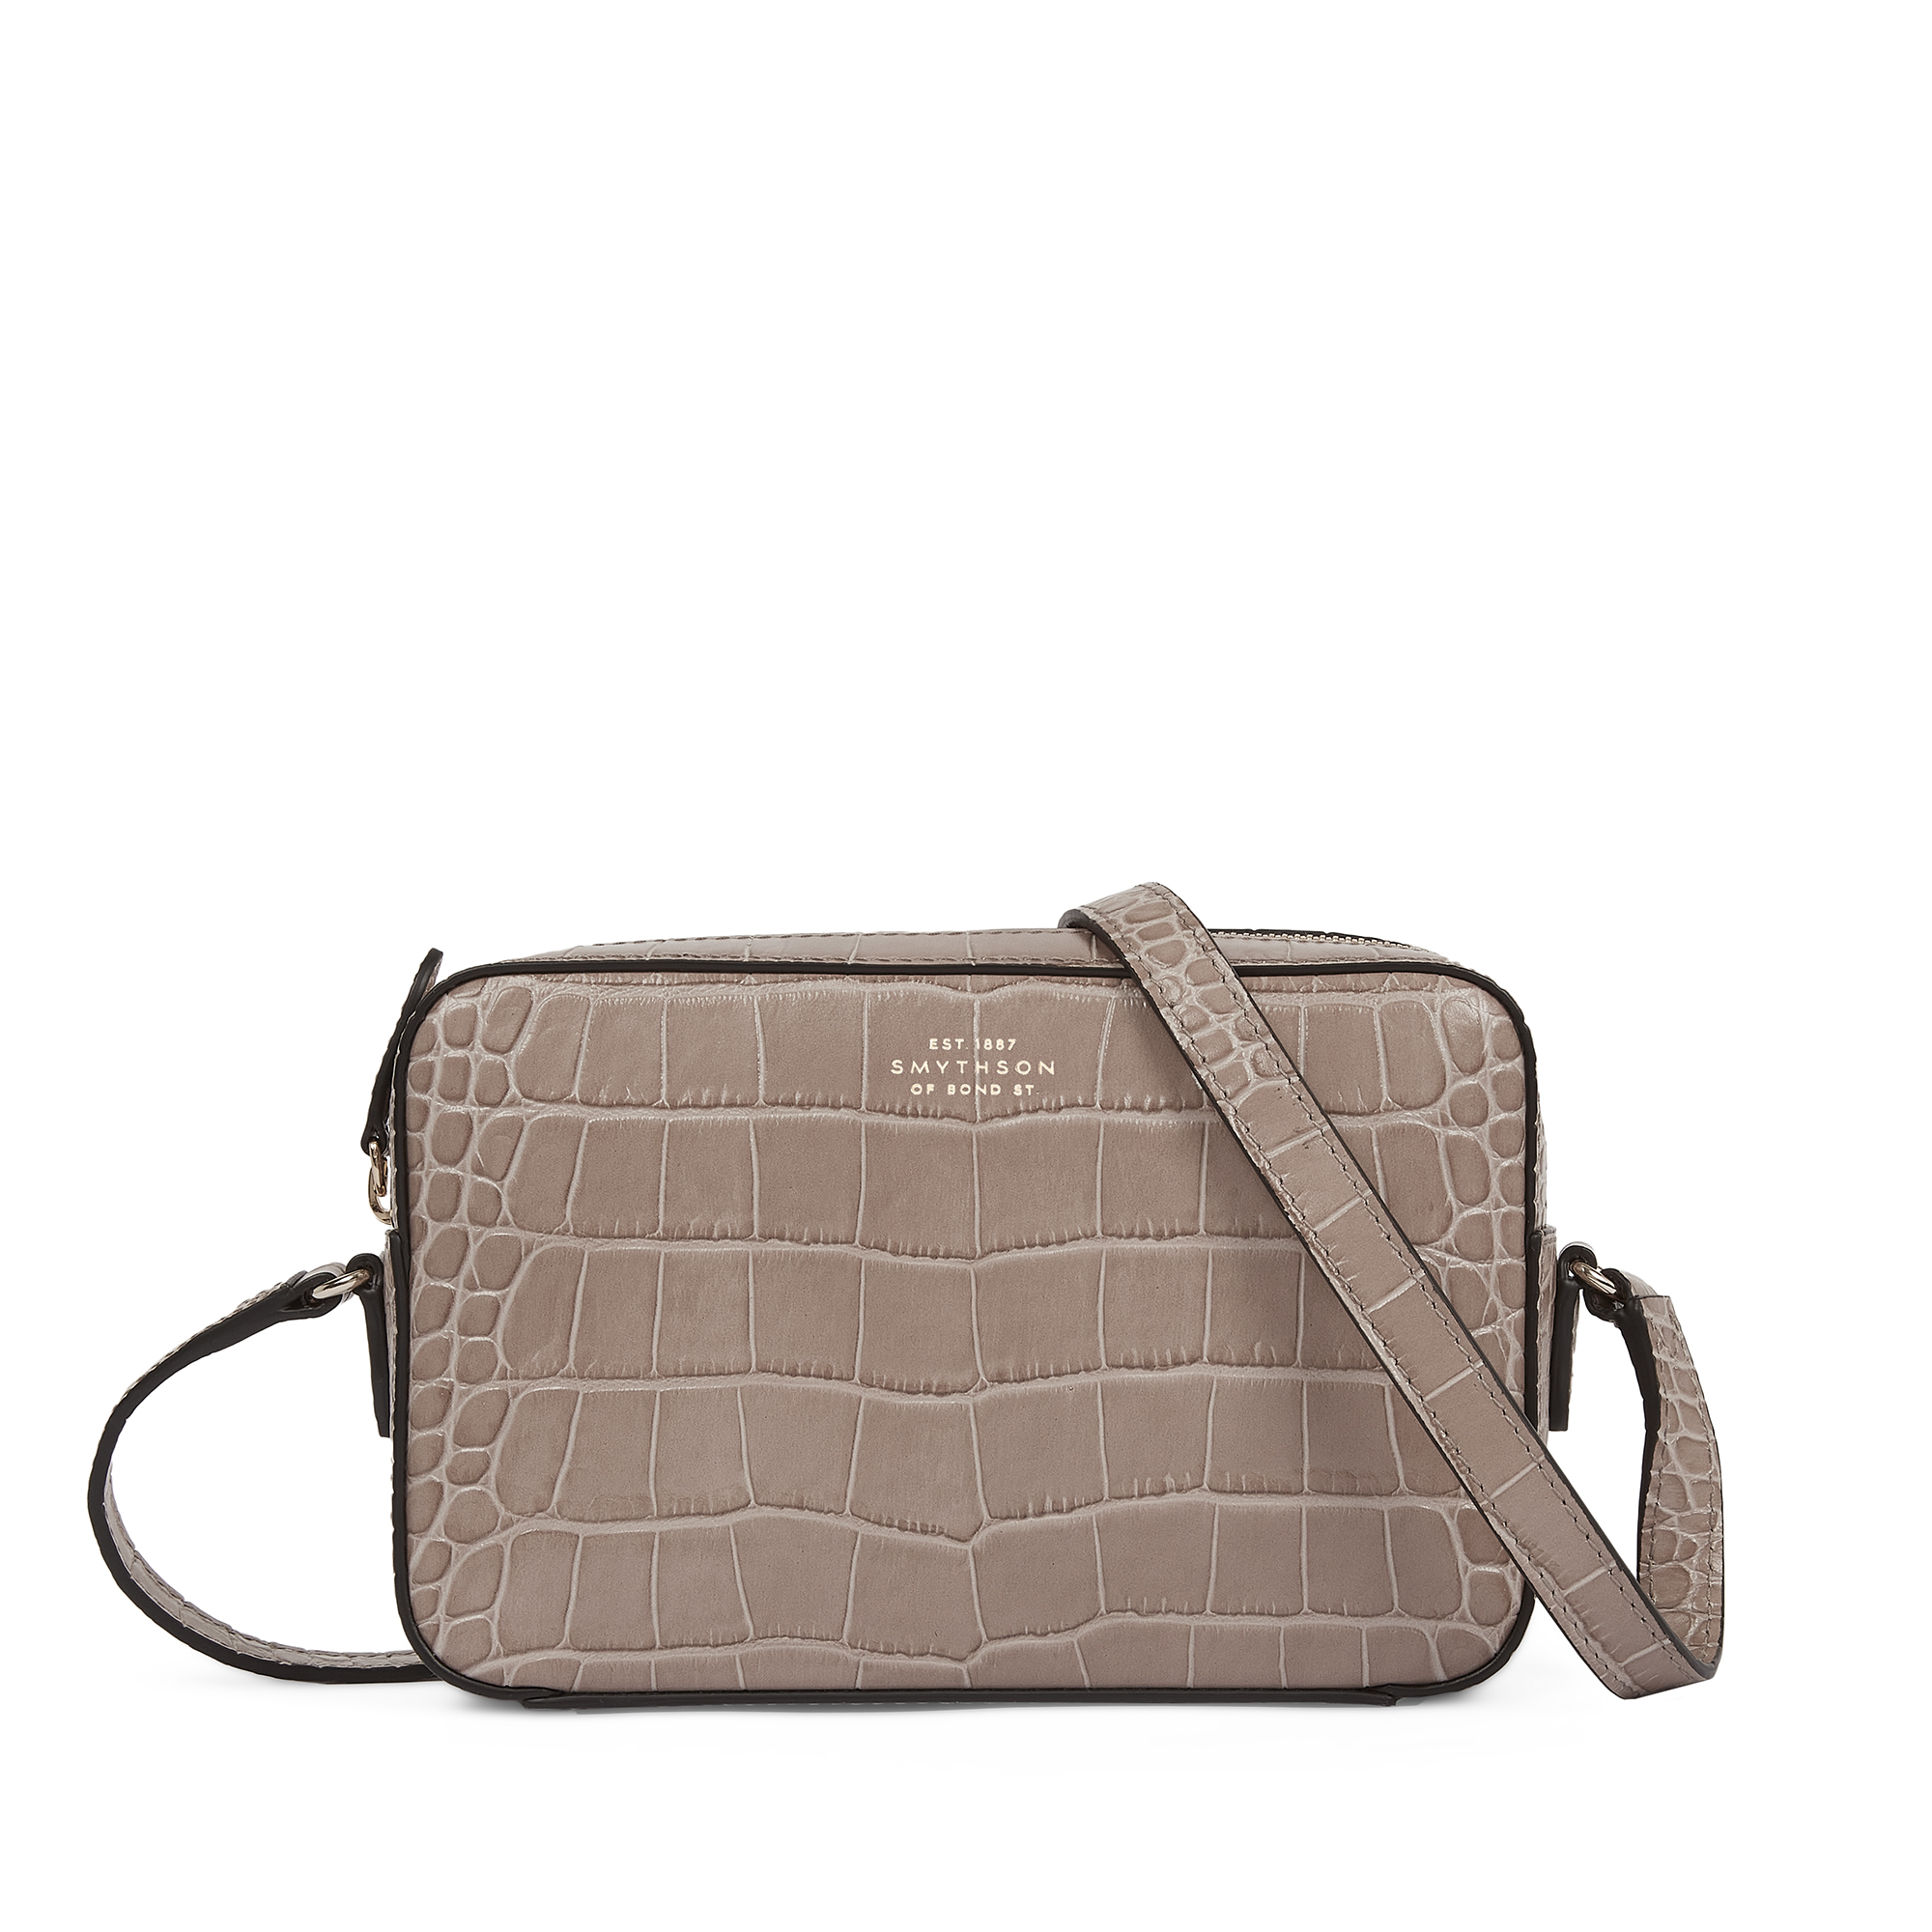 Smythson Small Camera Bag In Mara In Taupe